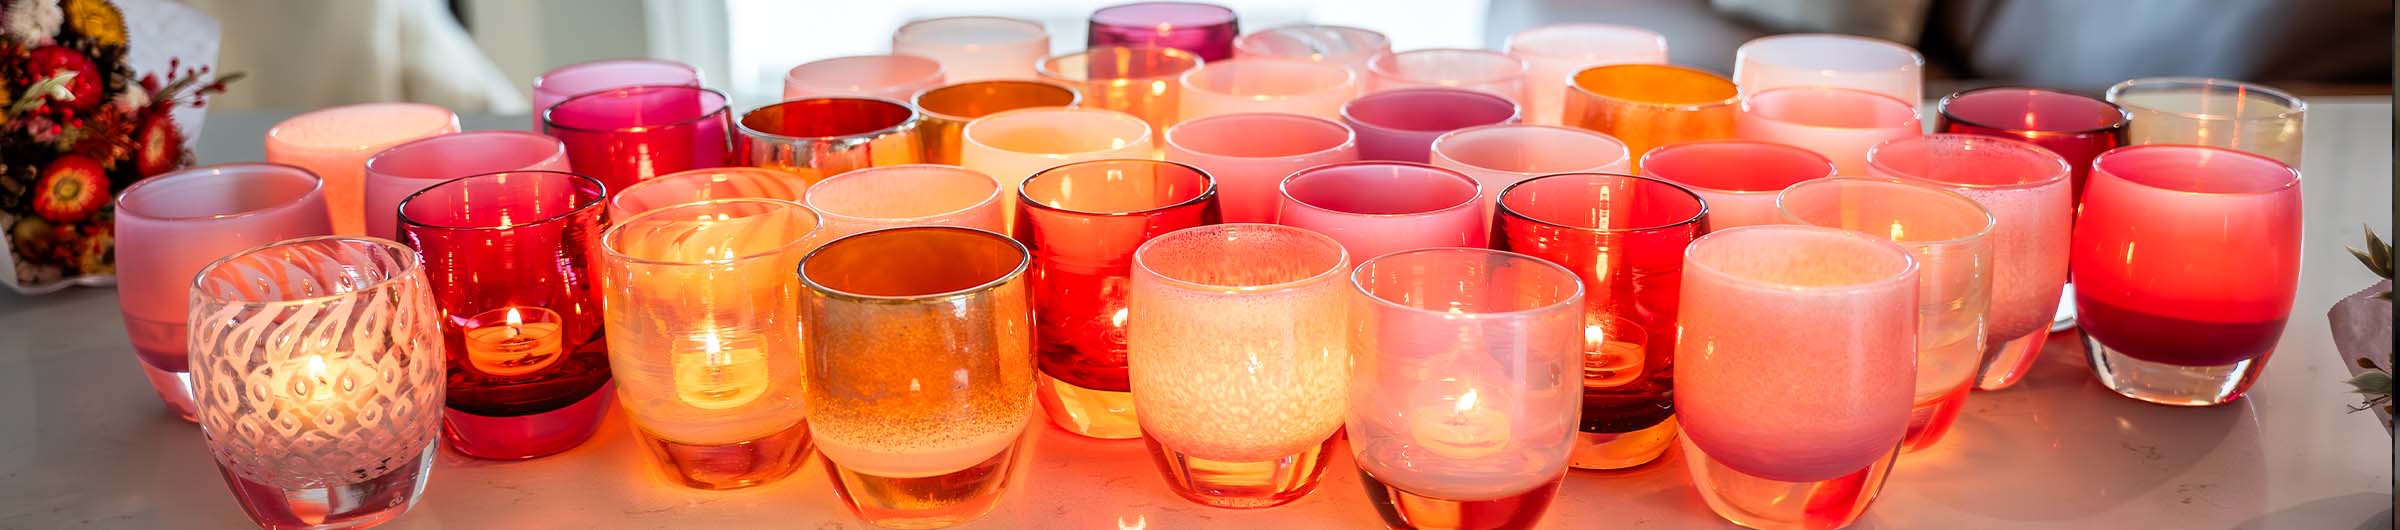 pink party collection, featuring a variety of pink hand-blown glass votive candle holders.